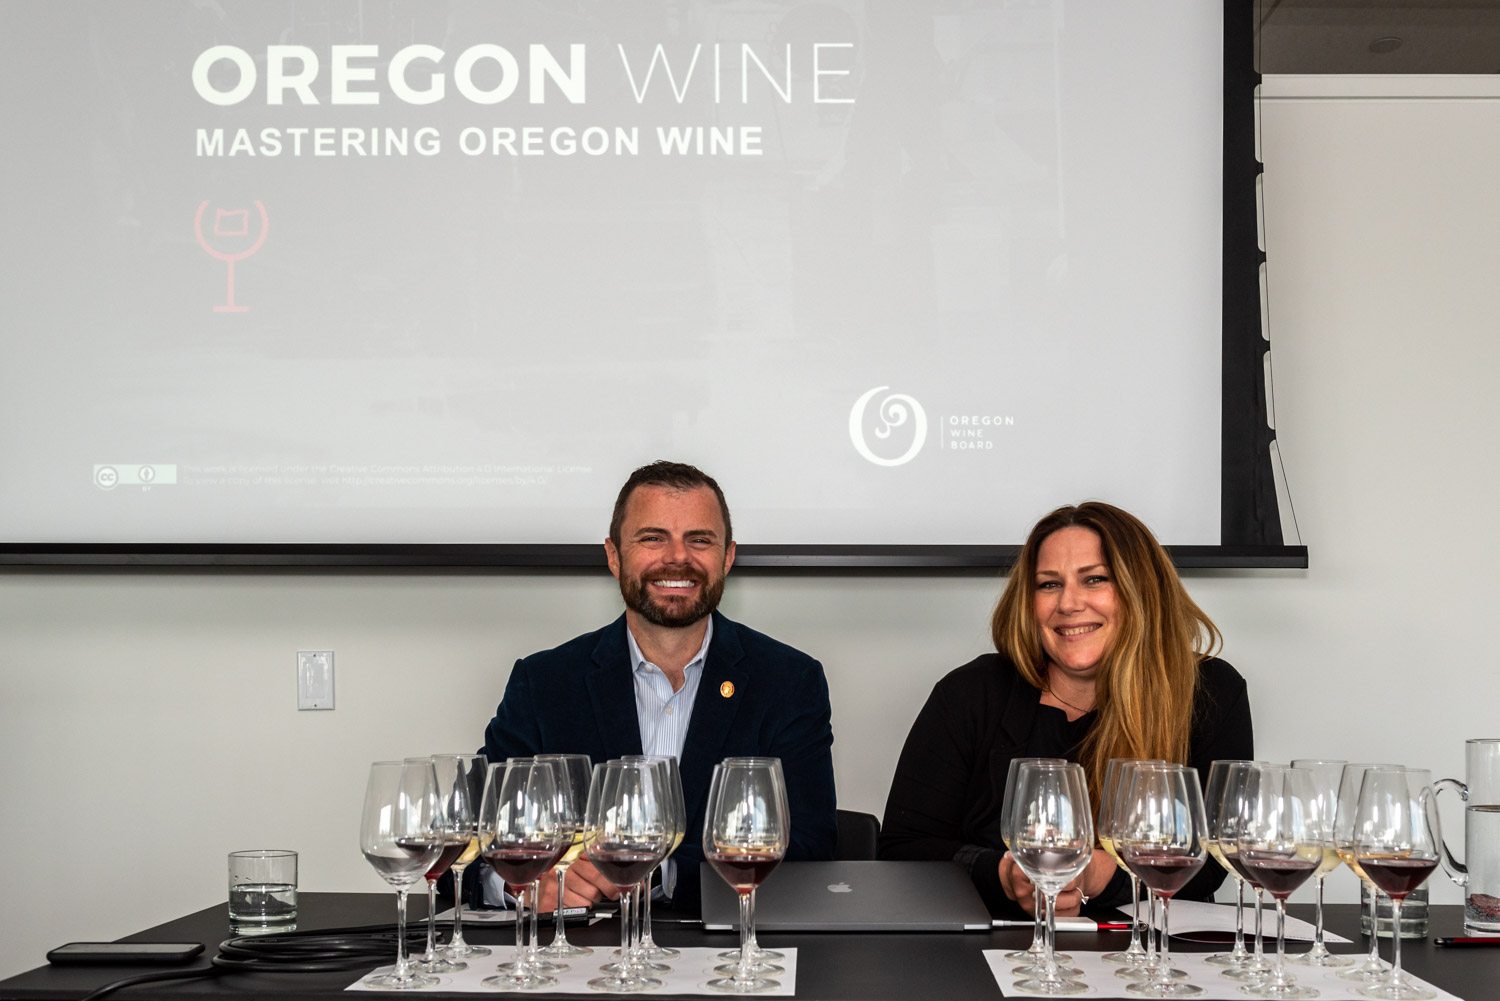 Chris Tanghe, MS, and Bree Stock, MW, leading an Oregon Wine Masterclass